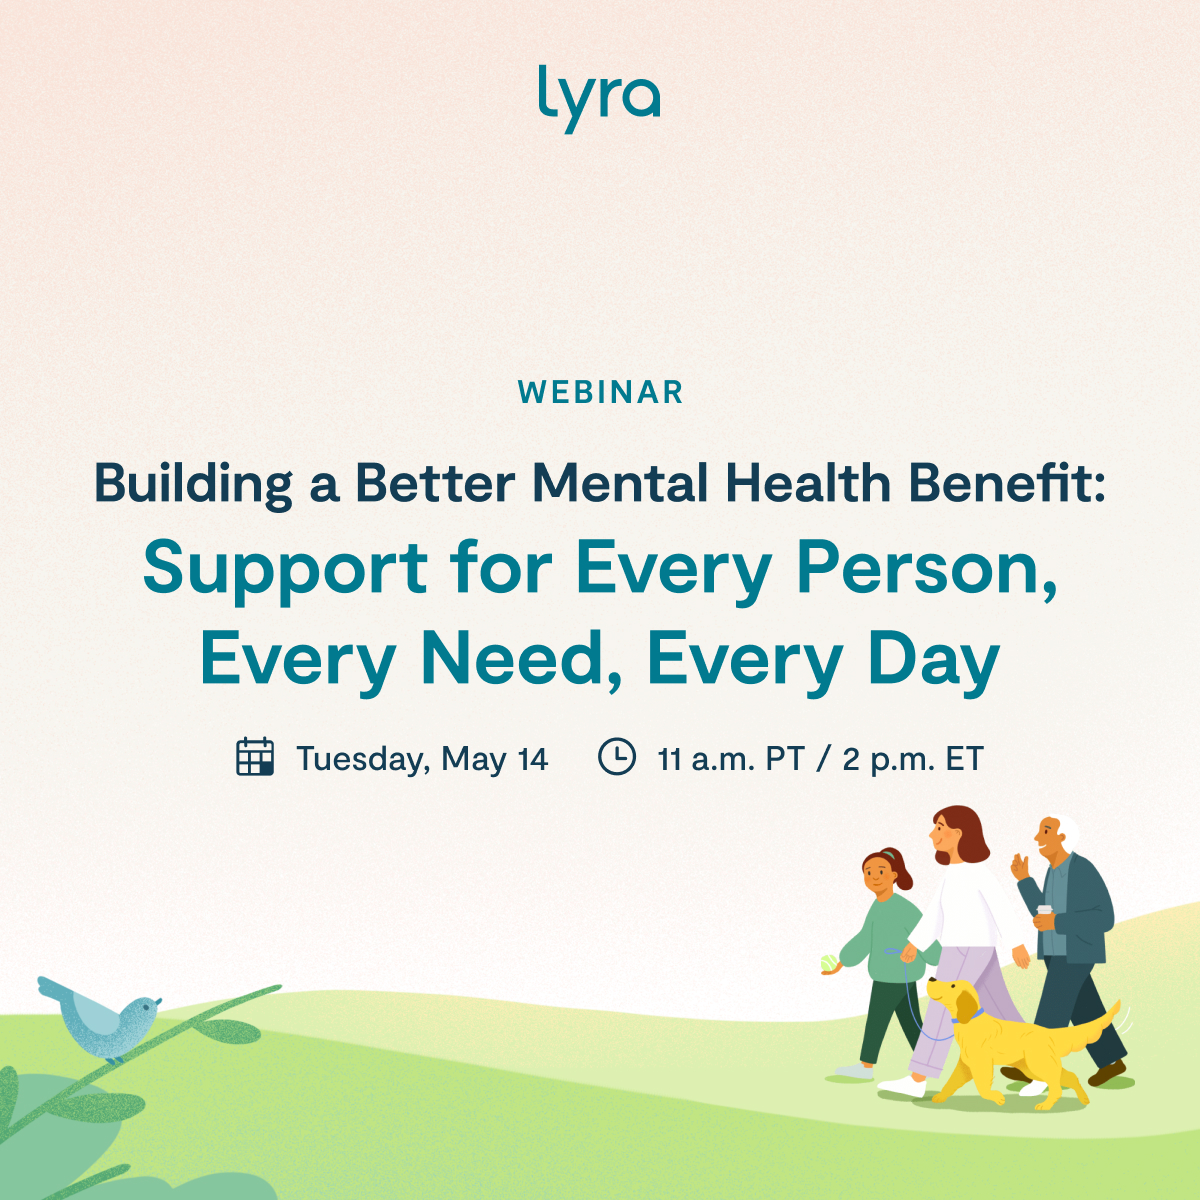 Join us for a #MentalHealthAwarenessMonth webinar! We'll cover what it looks like to support every person, every need, every day—with an evidence-based mental health benefit that works. Register here: bit.ly/3JKnRAc. 📆 #WhyLyra